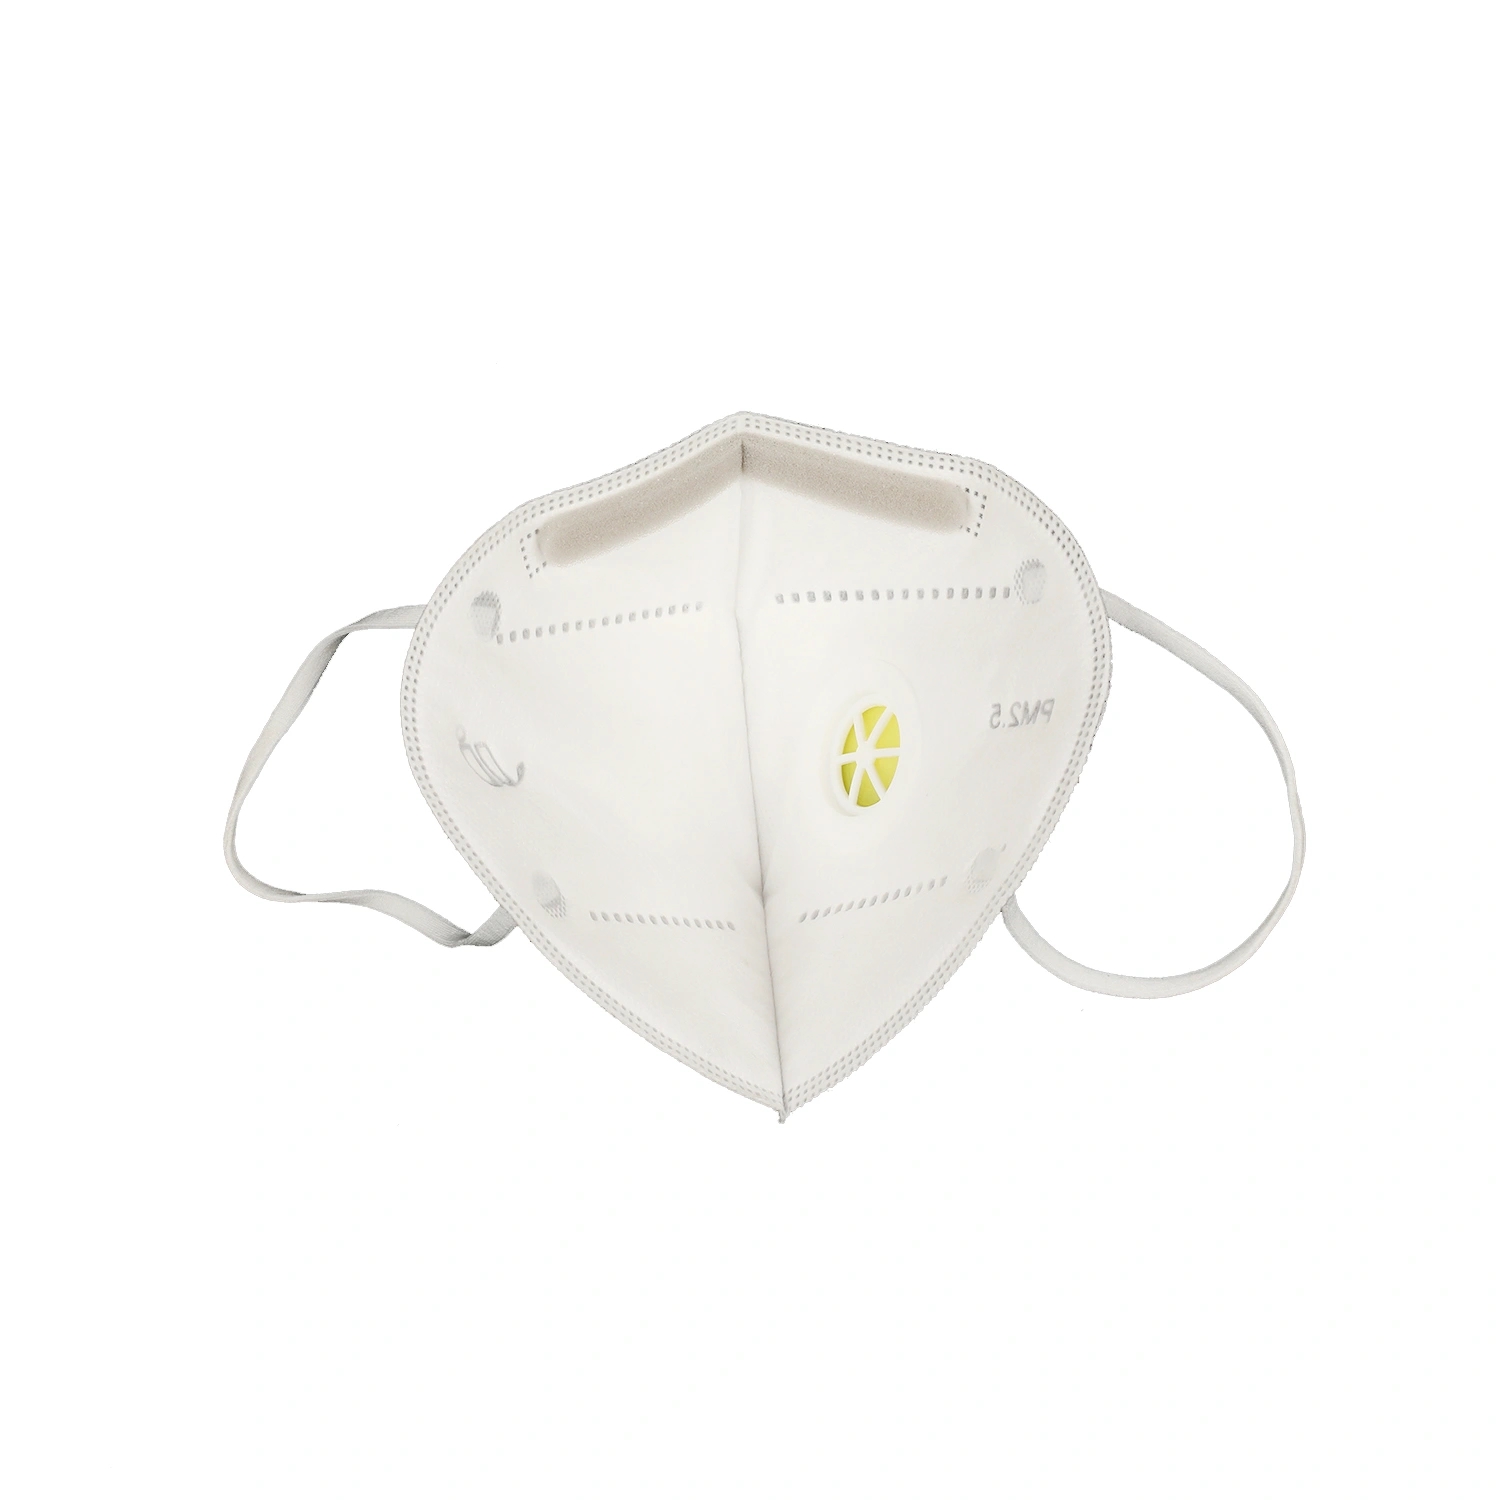 Disposable Authentic KN95 Dust Face Mask With Valve